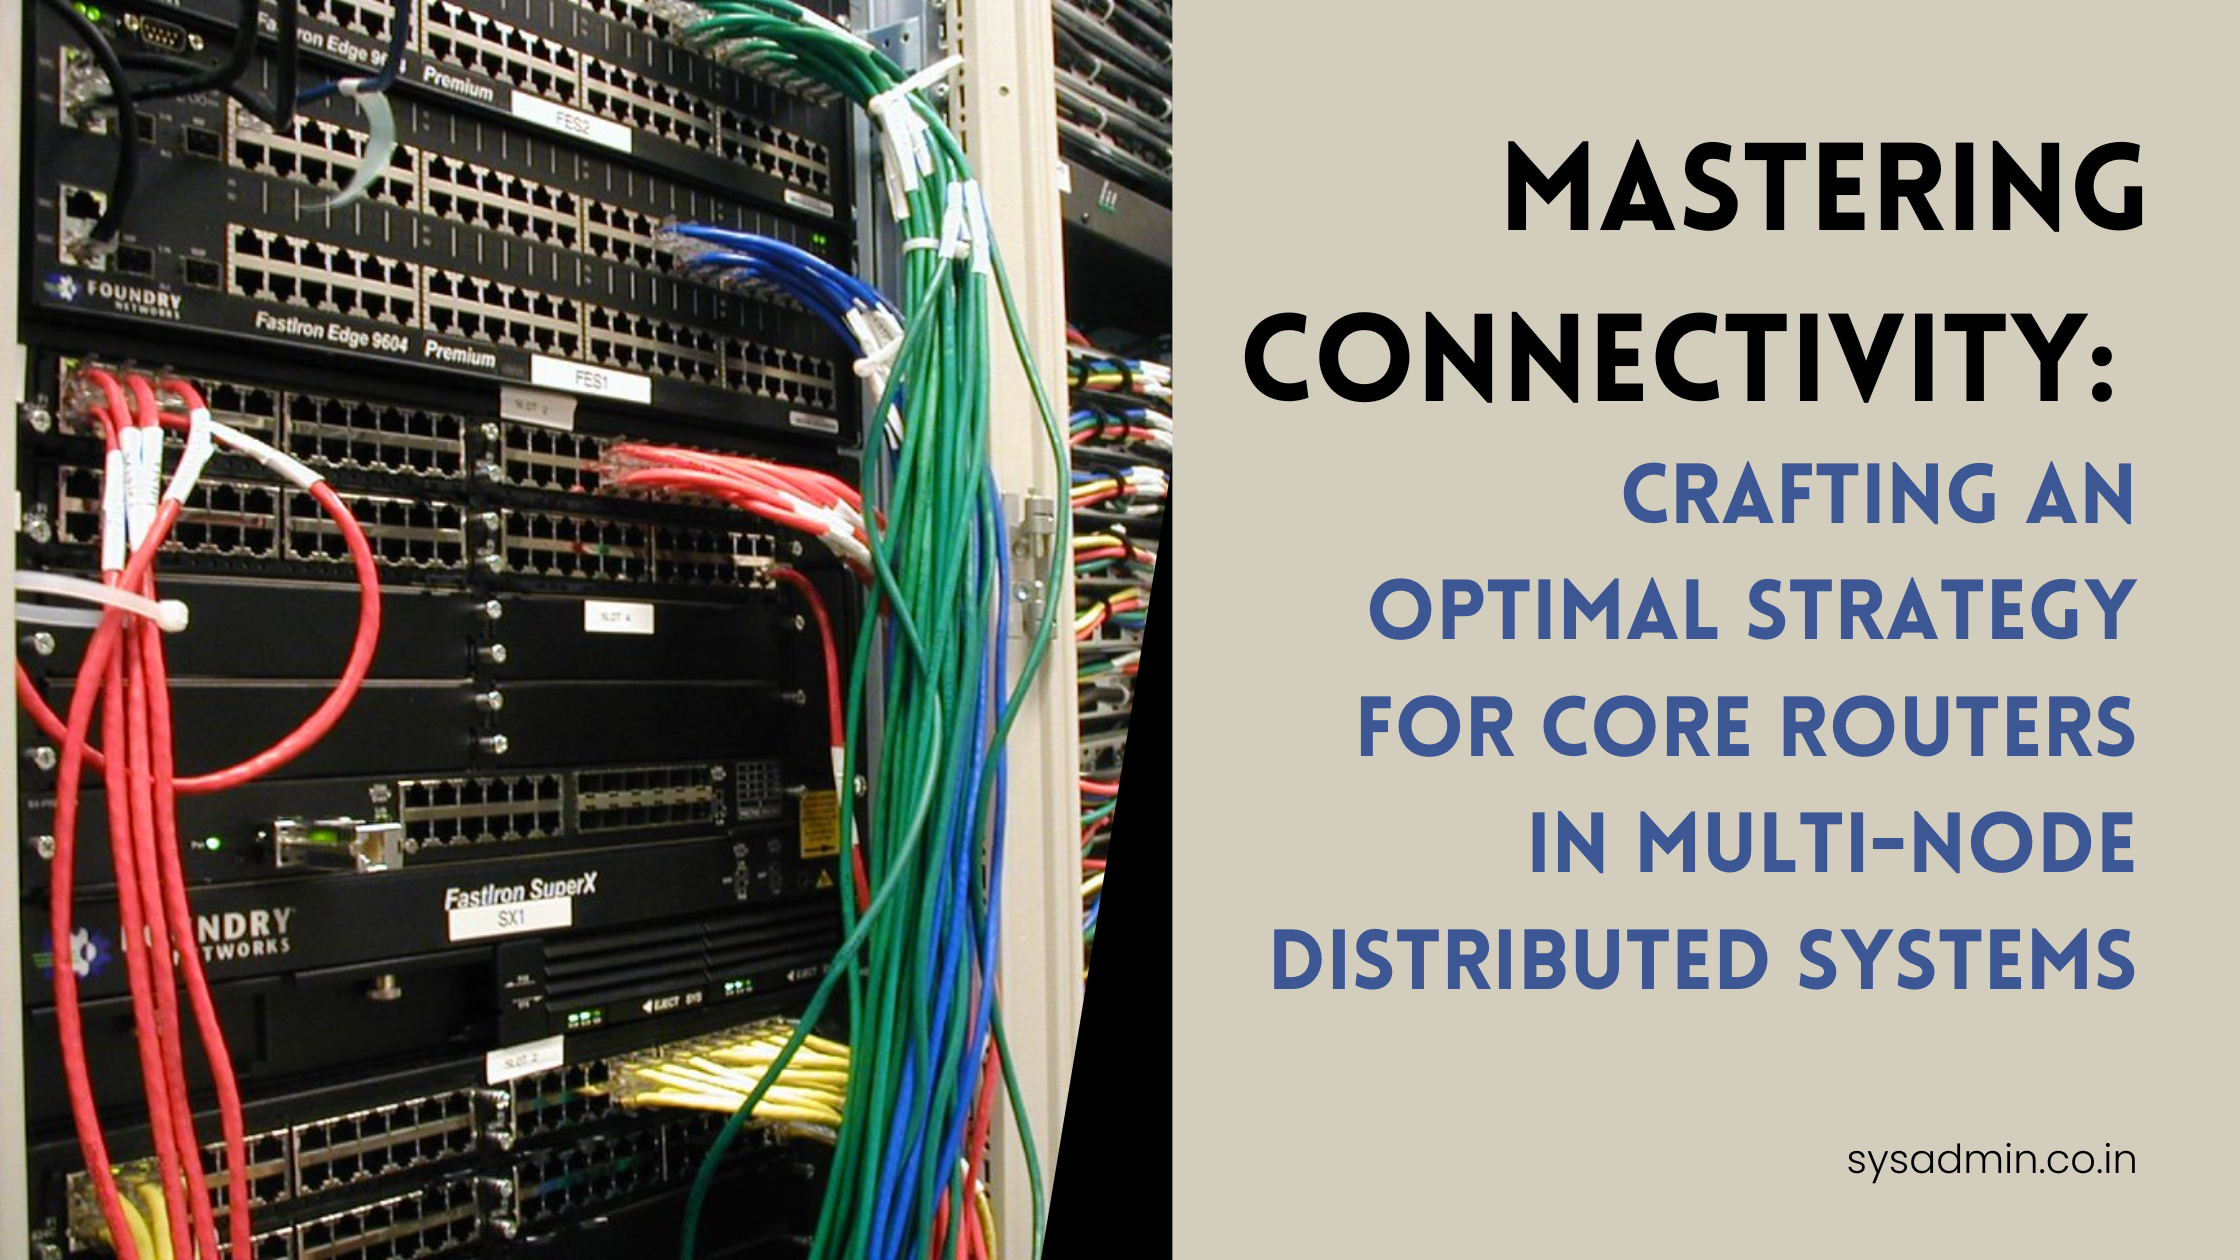 Mastering Connectivity: Crafting an Optimal Strategy for Core Routers in Multi-Node Distributed Systems